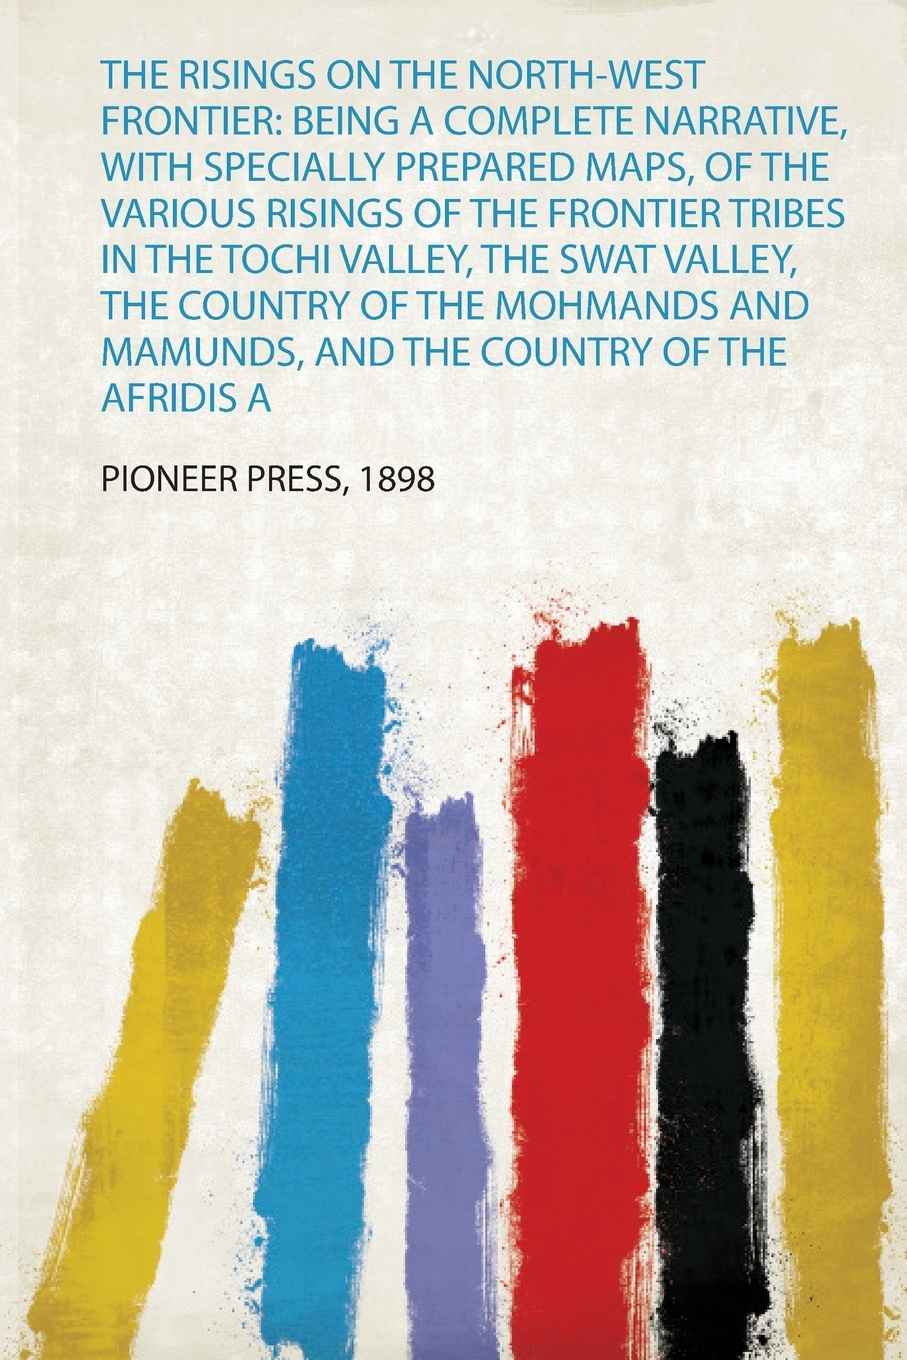 The Risings on the North-West Frontier. Being a Complete Narrative, With Specially Prepared Maps, of the Various Risings of the Frontier Tribes in the Tochi Valley, the Swat Valley, the Country of the Mohmands and Mamunds, and the Country of the A...